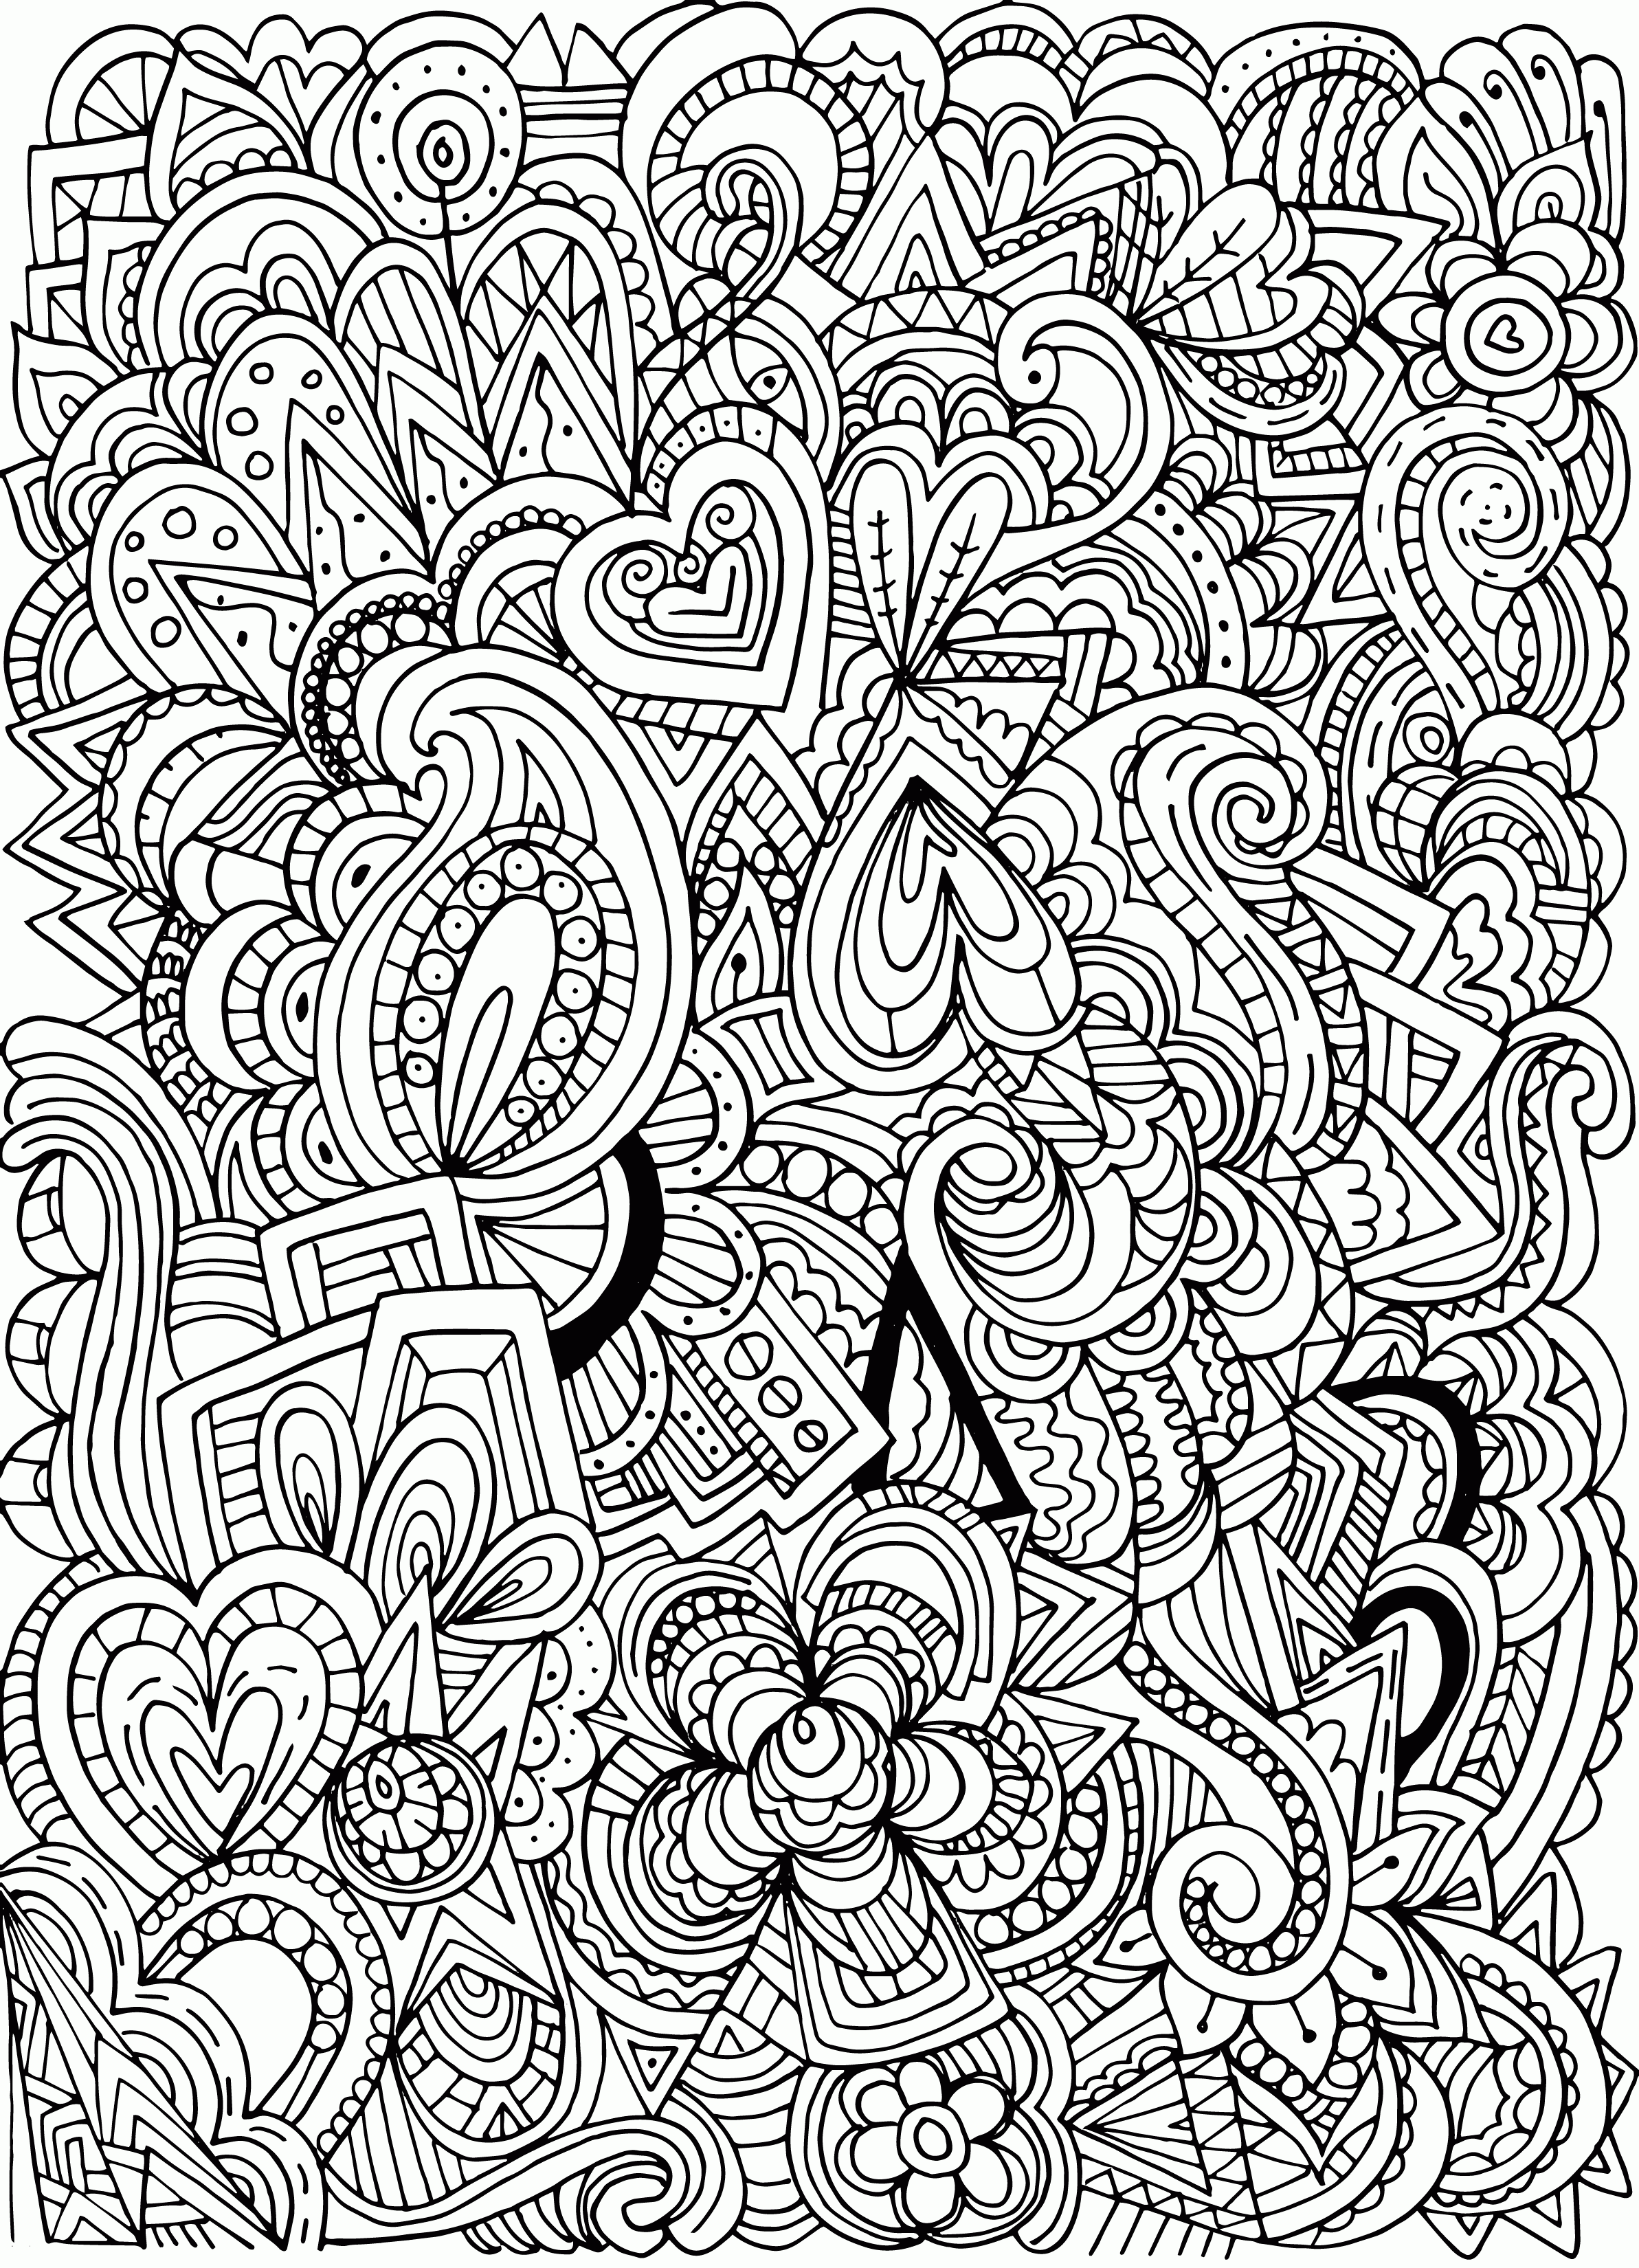 Free Adult Coloring Pages Patterns, Download Free Adult Coloring Pages